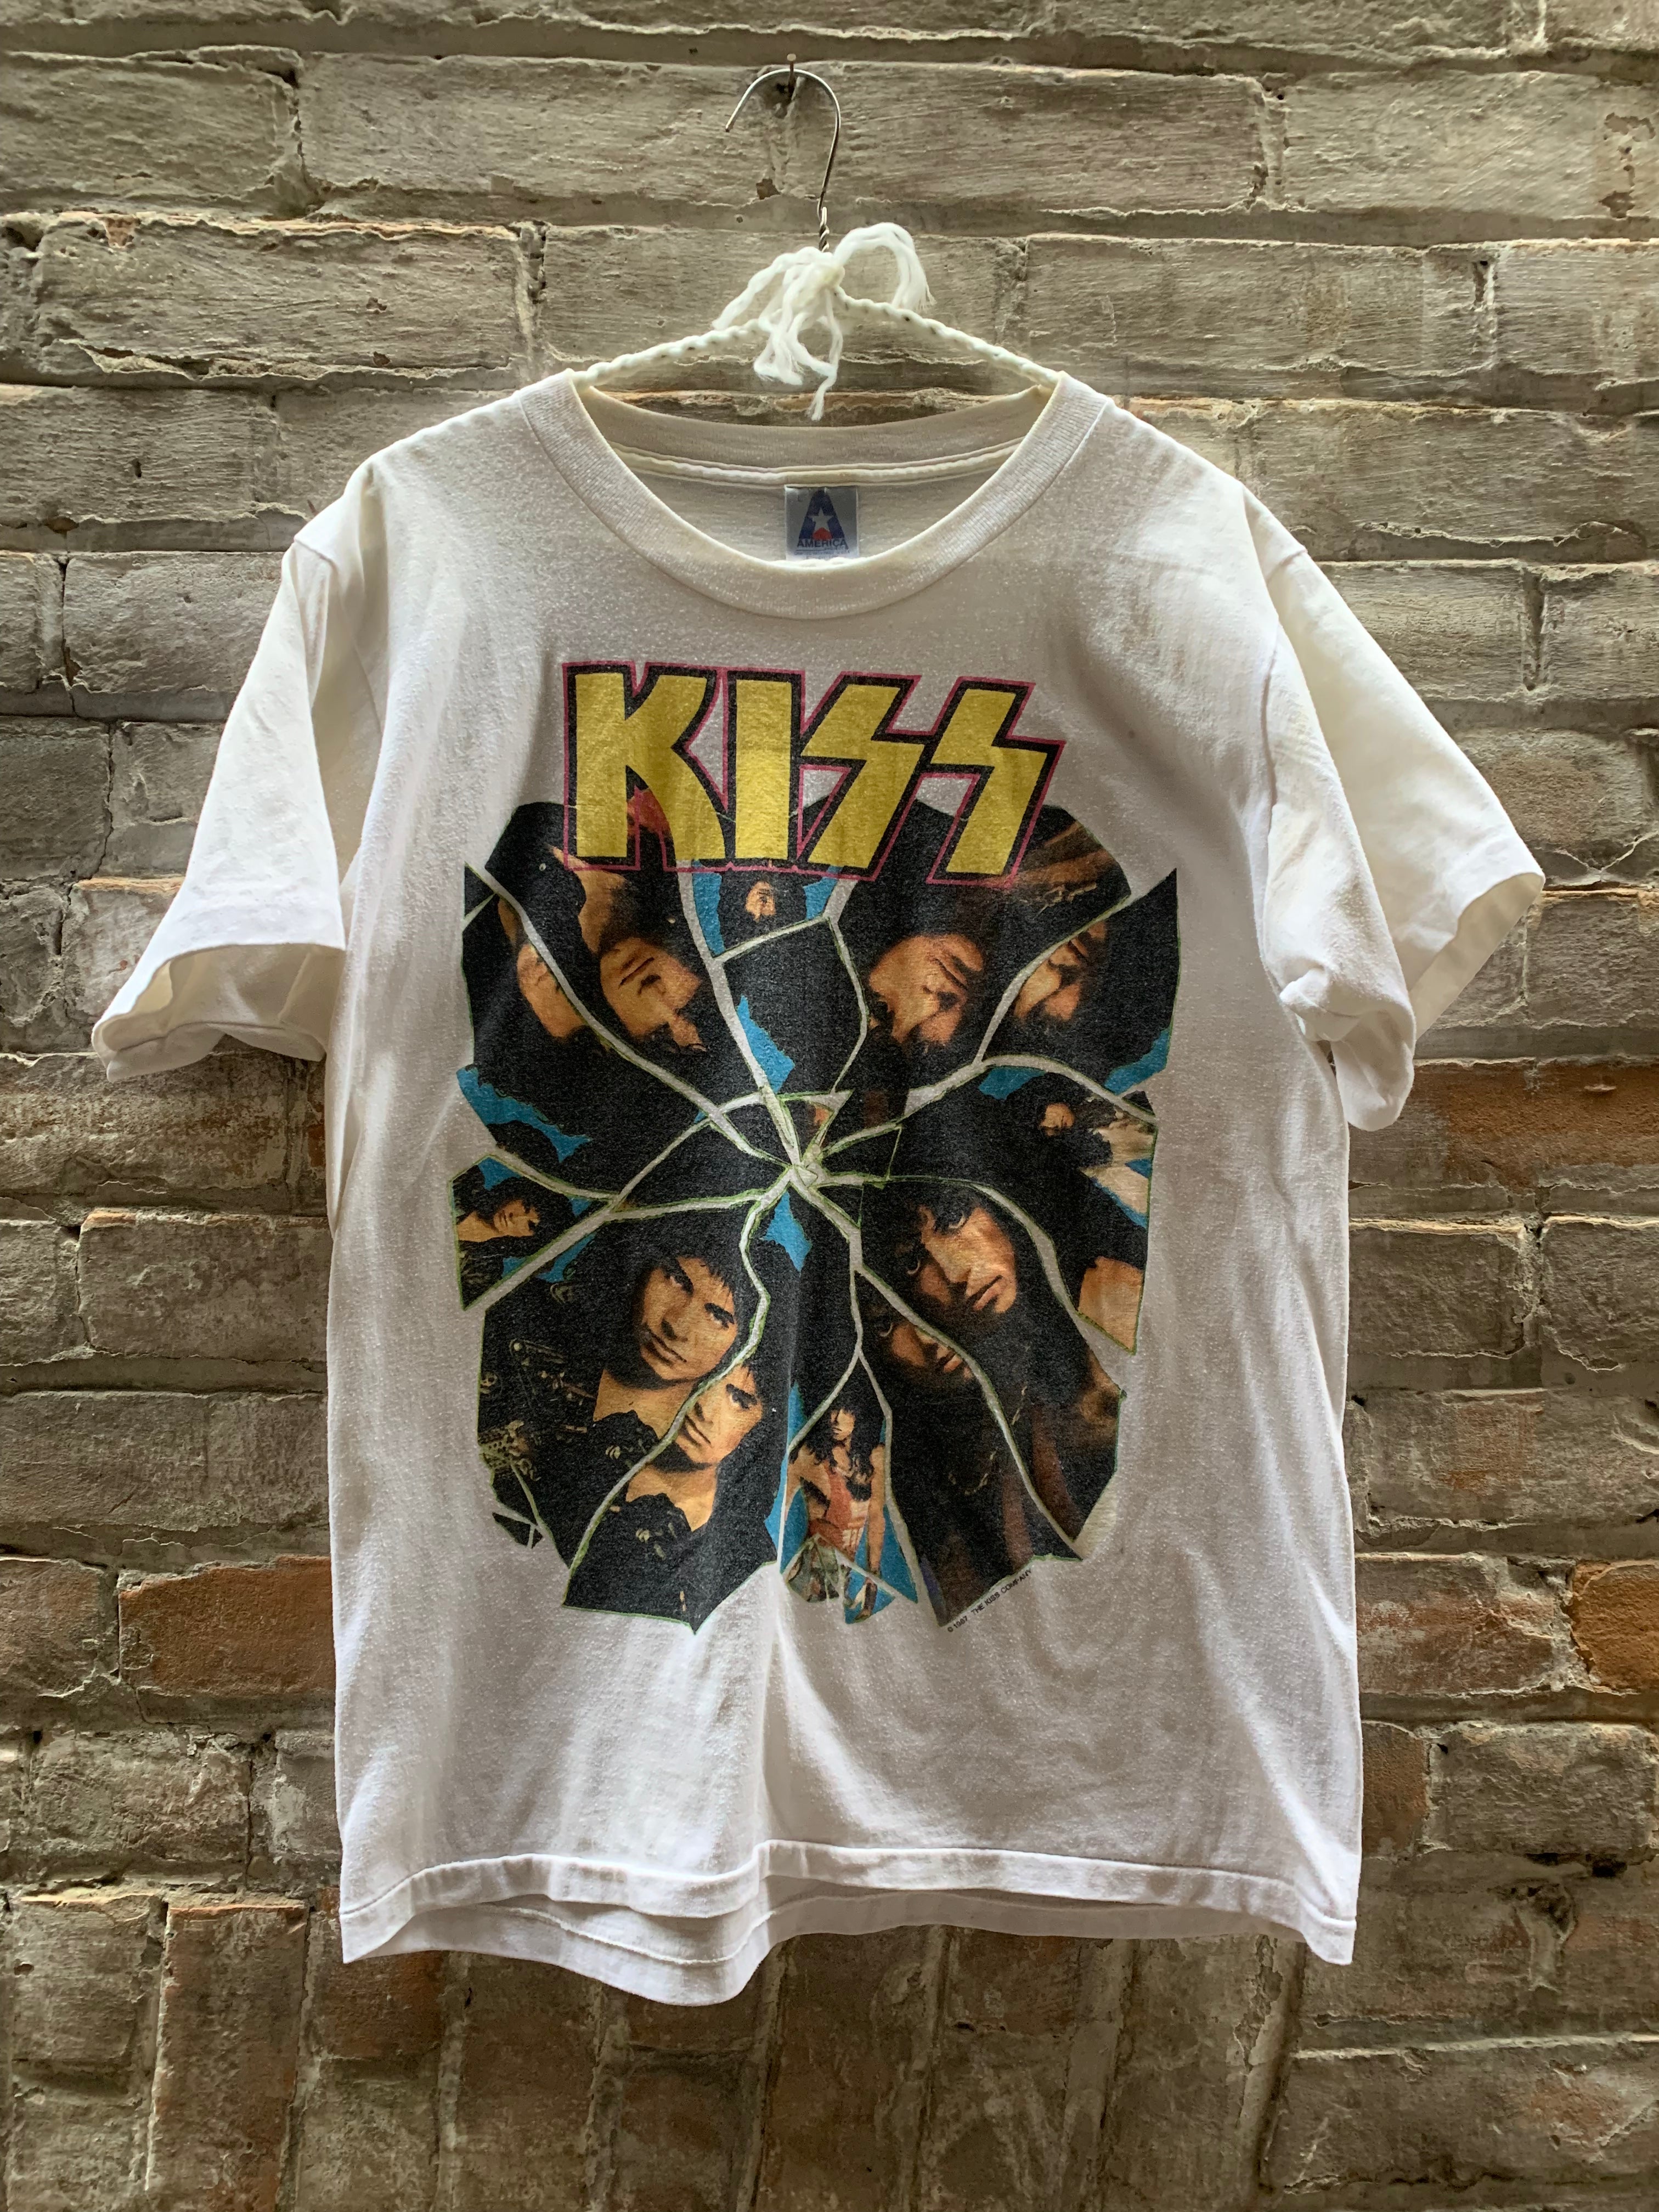 RR294) '87 KISS T- CHED radio - I Went Crazy with Kiss